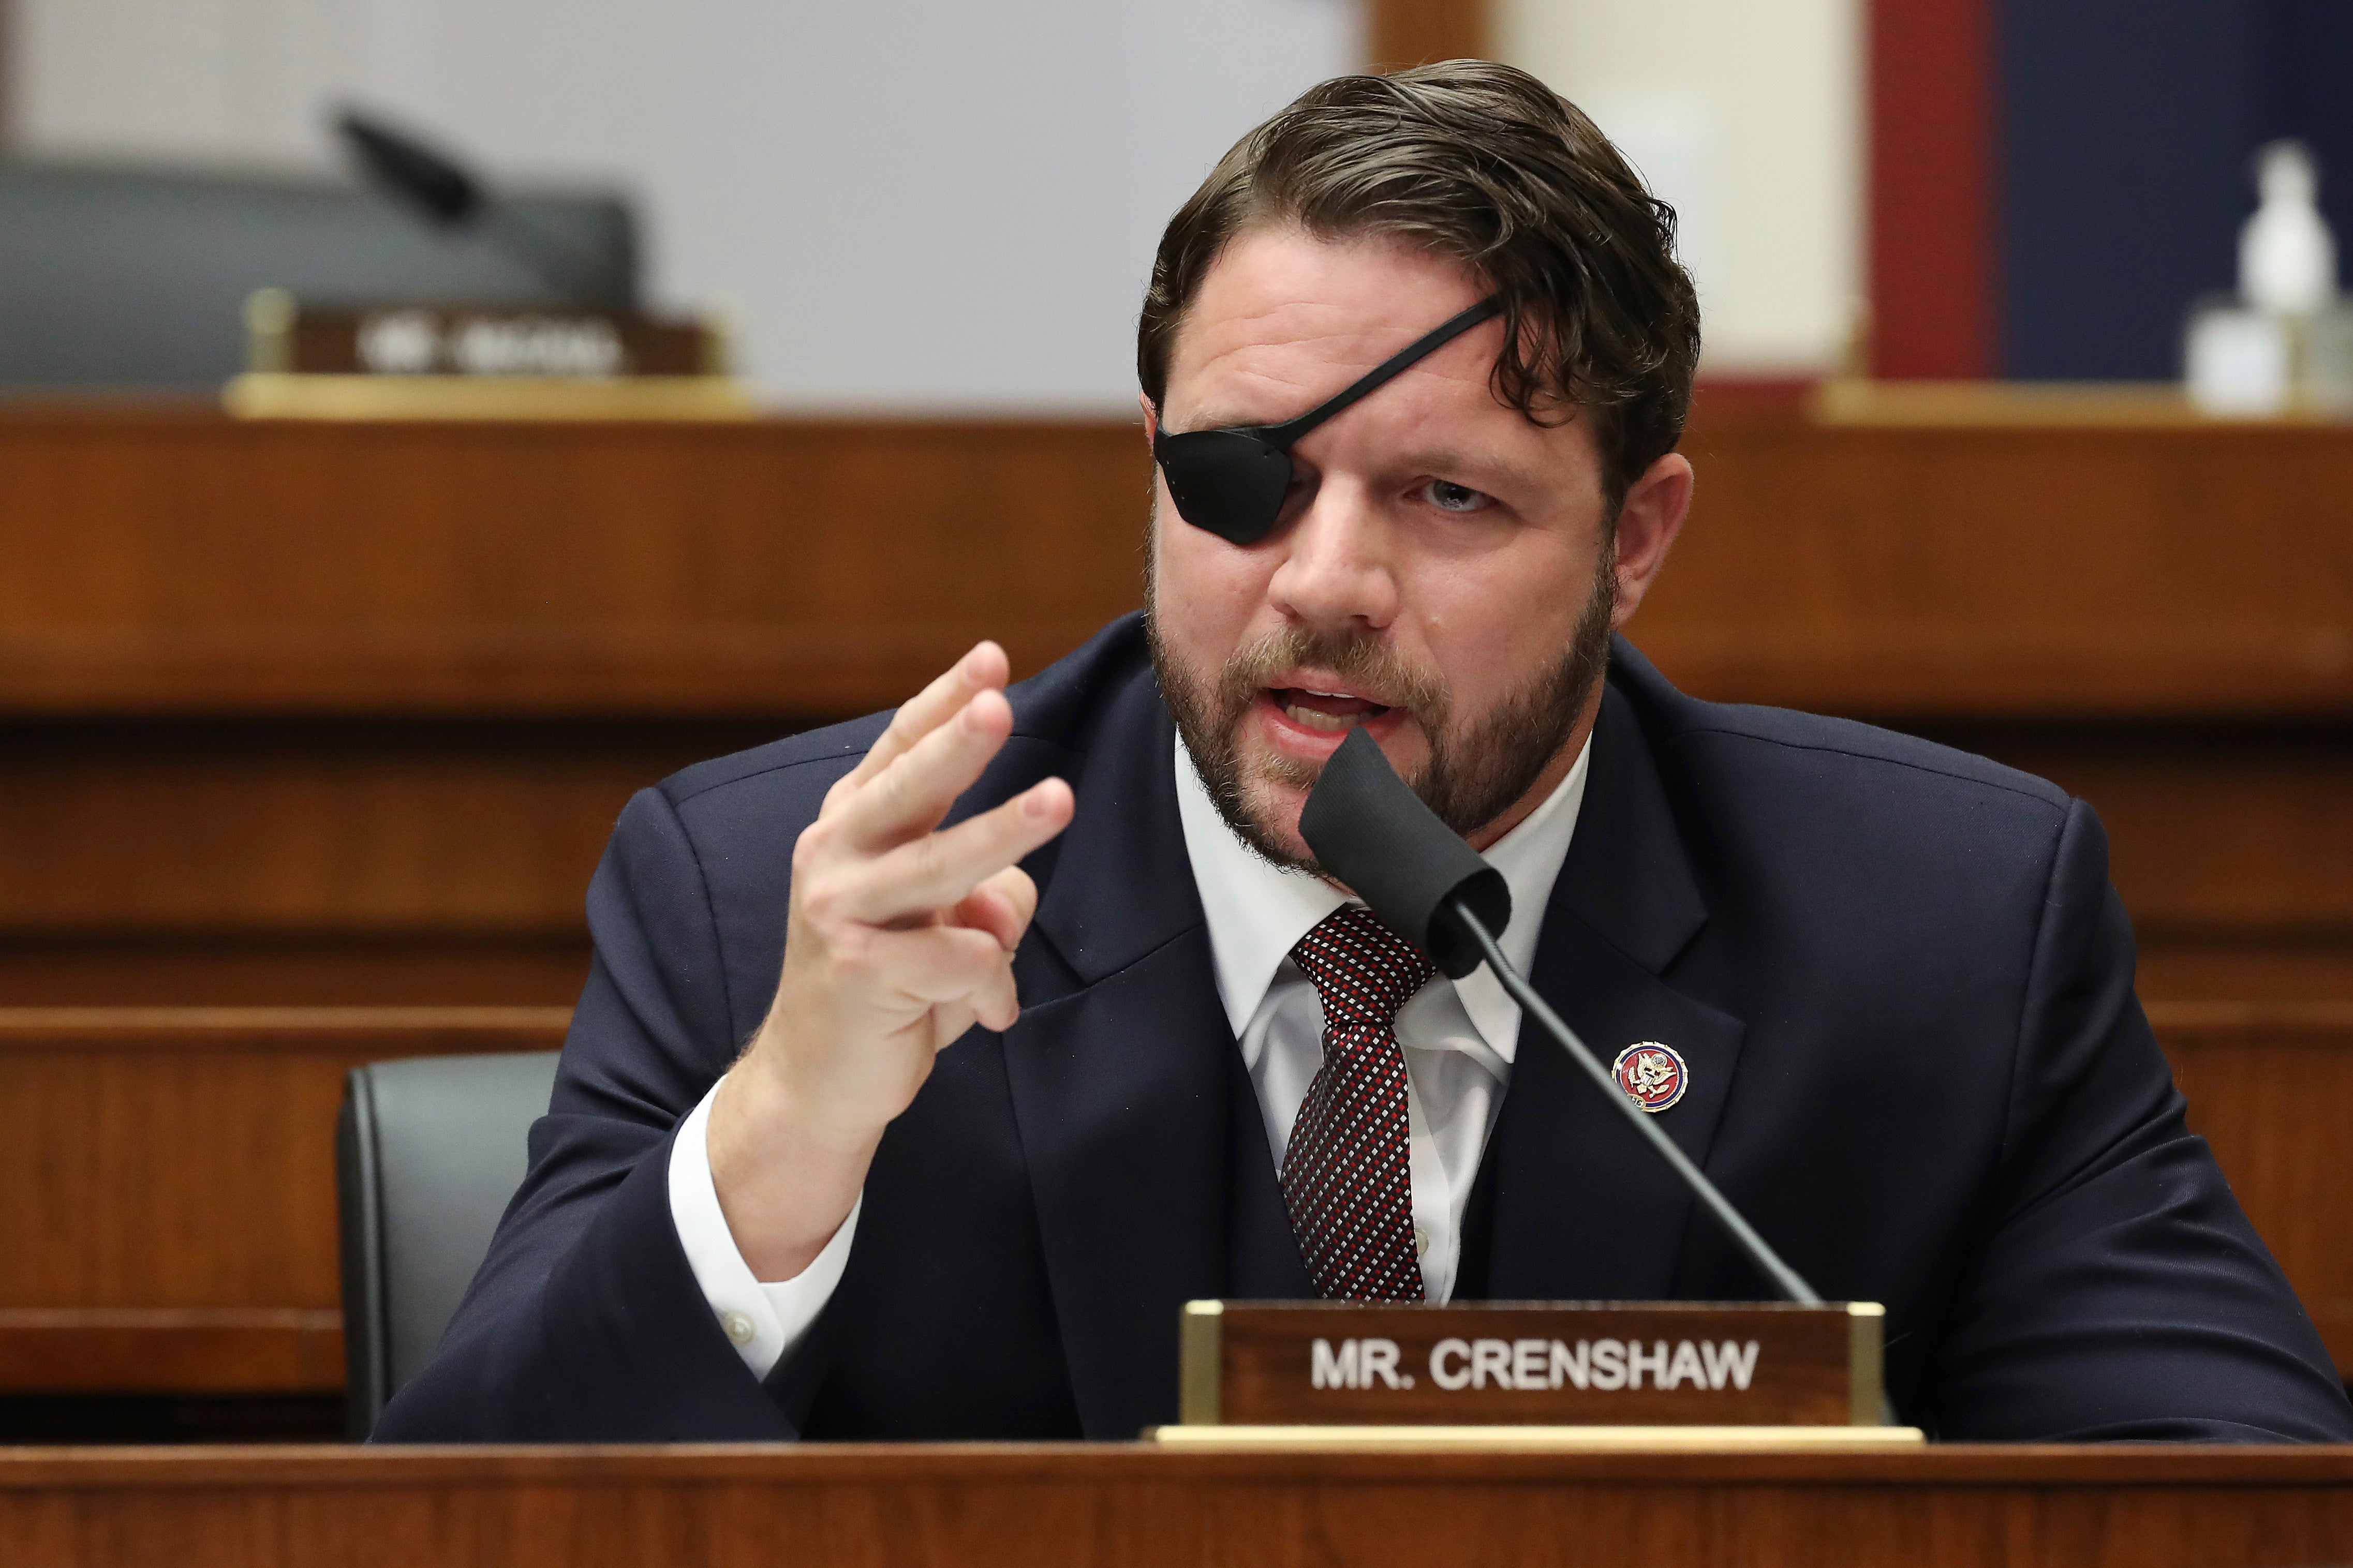 Rep. Dan Crenshaw says he’ll be blind for about a month as he recovers from eye surgery